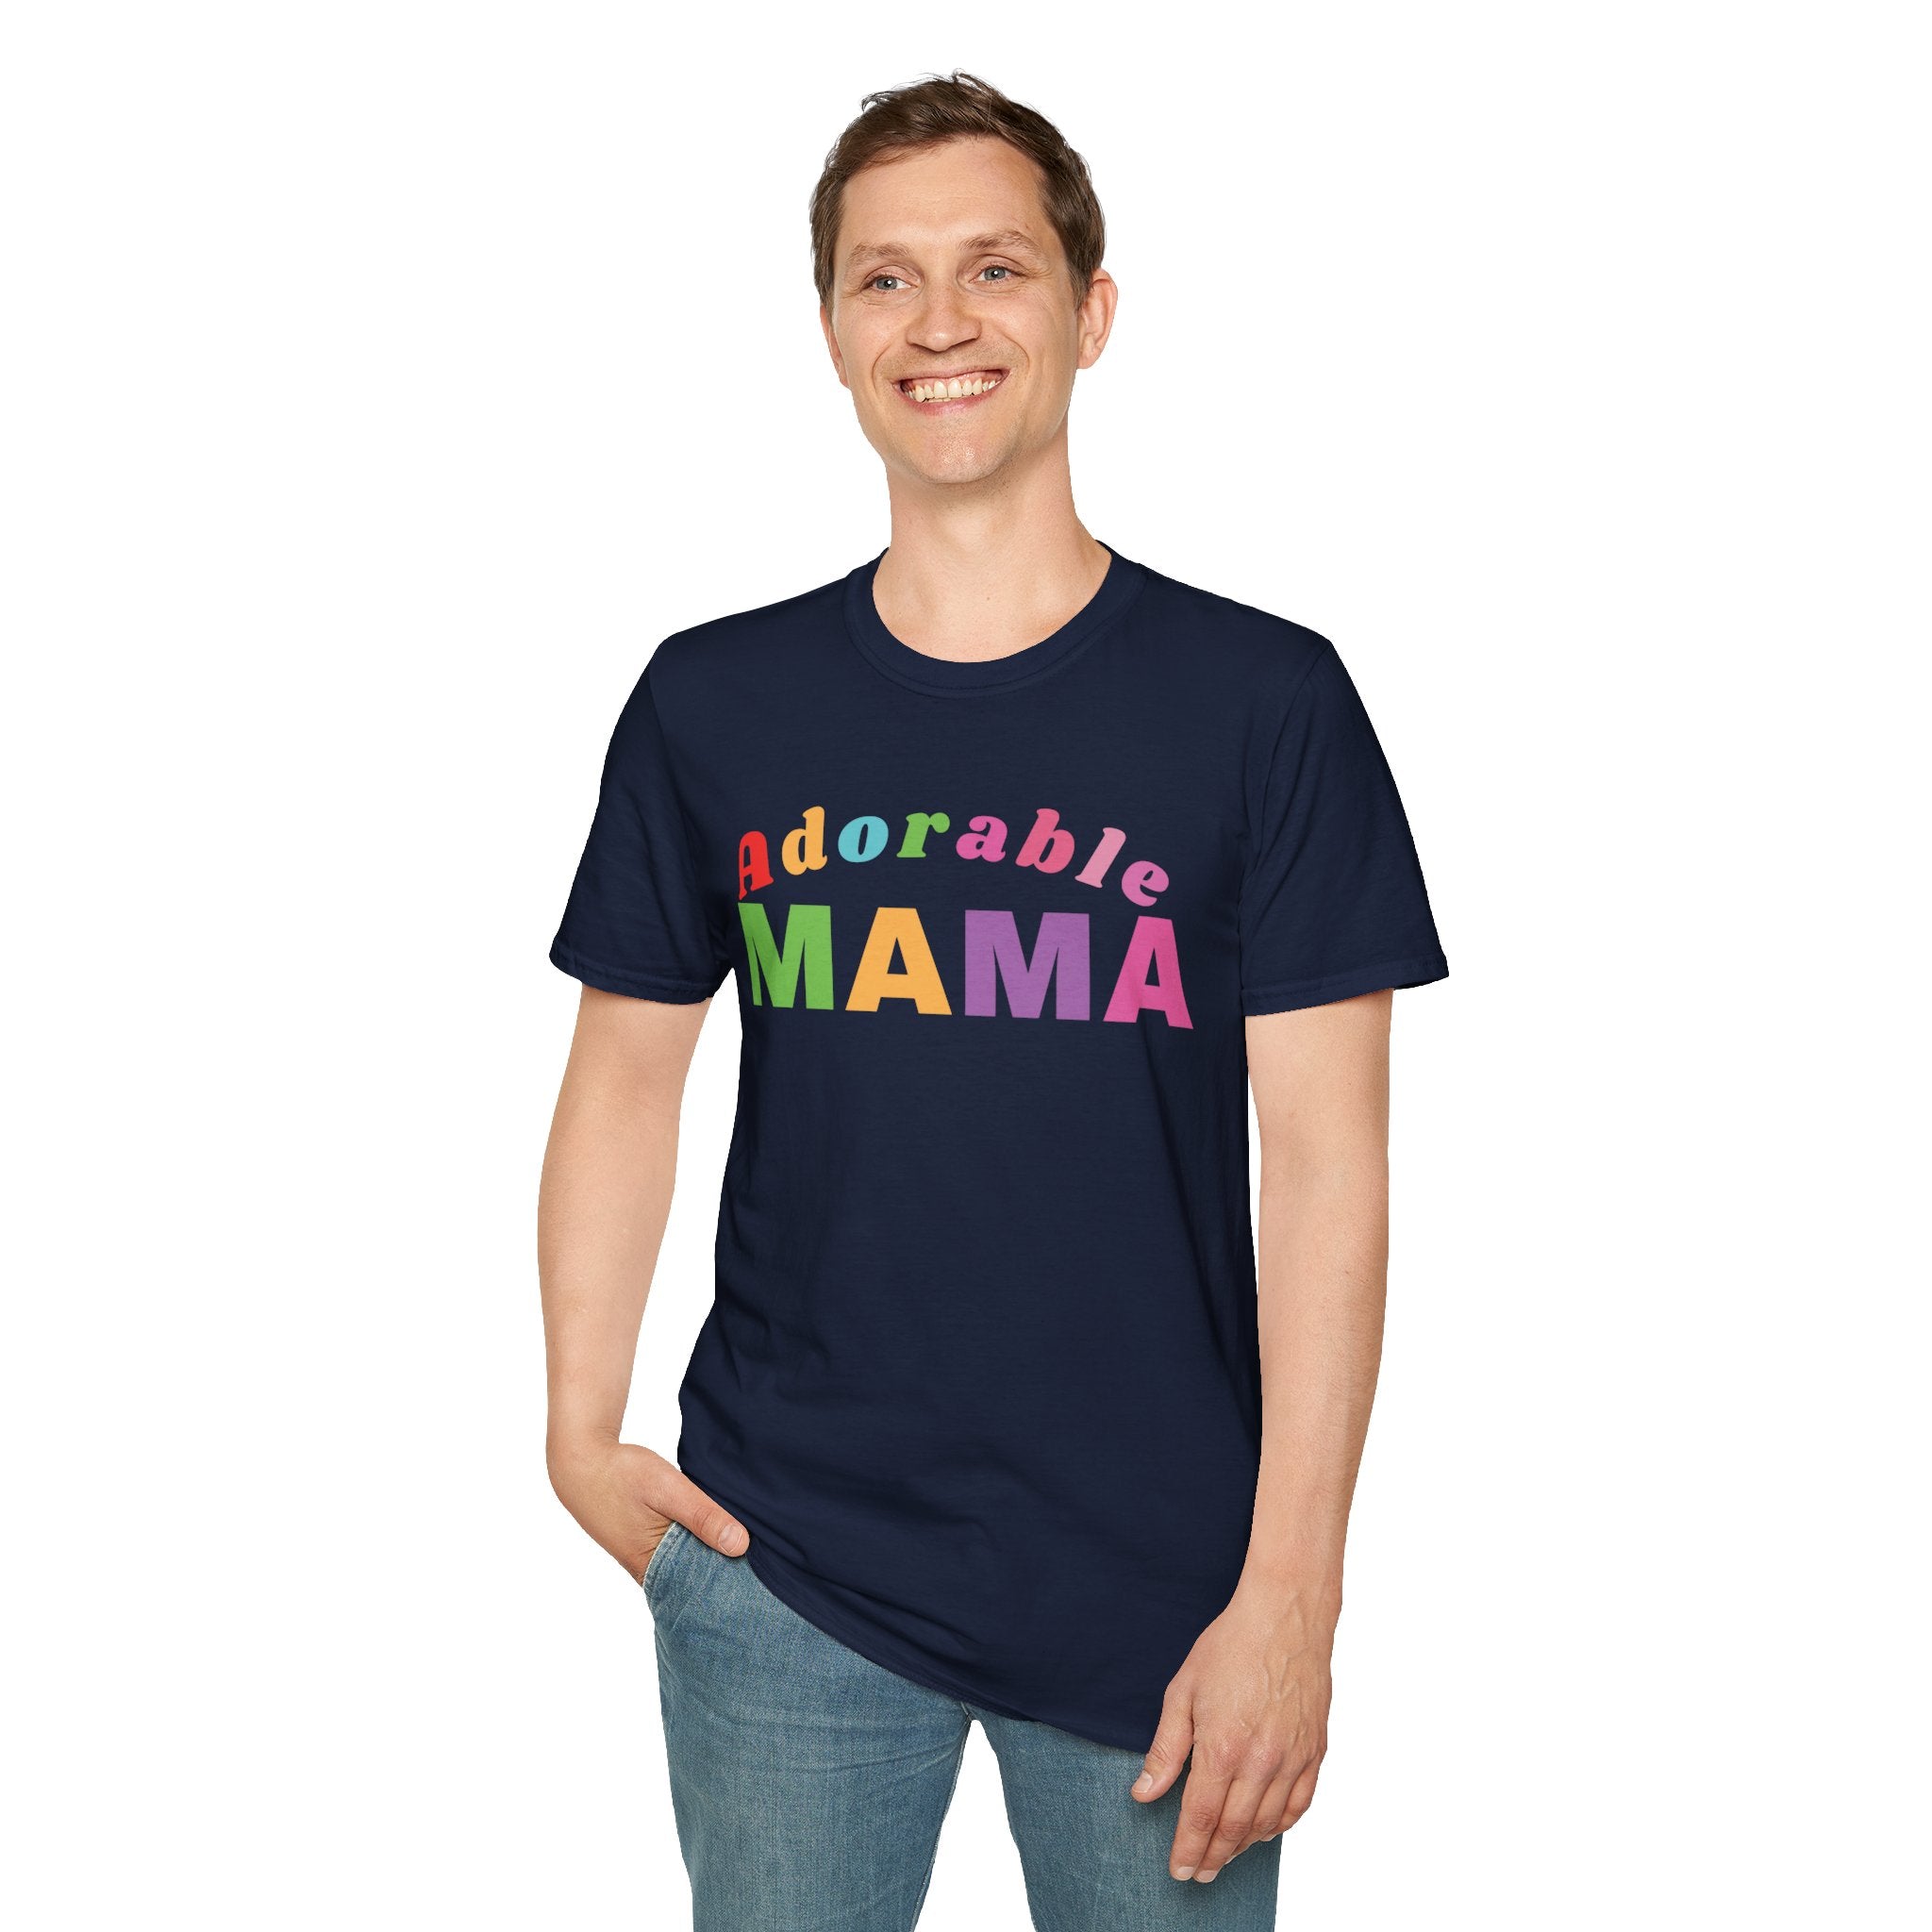 Adorable Mama Unisex Softstyle Crew Neck T-Shirt, Mom Shirt, Gift for Mom, Mother's Day Gift, Gift for Sister, Gift for Wife, Gift for Friend